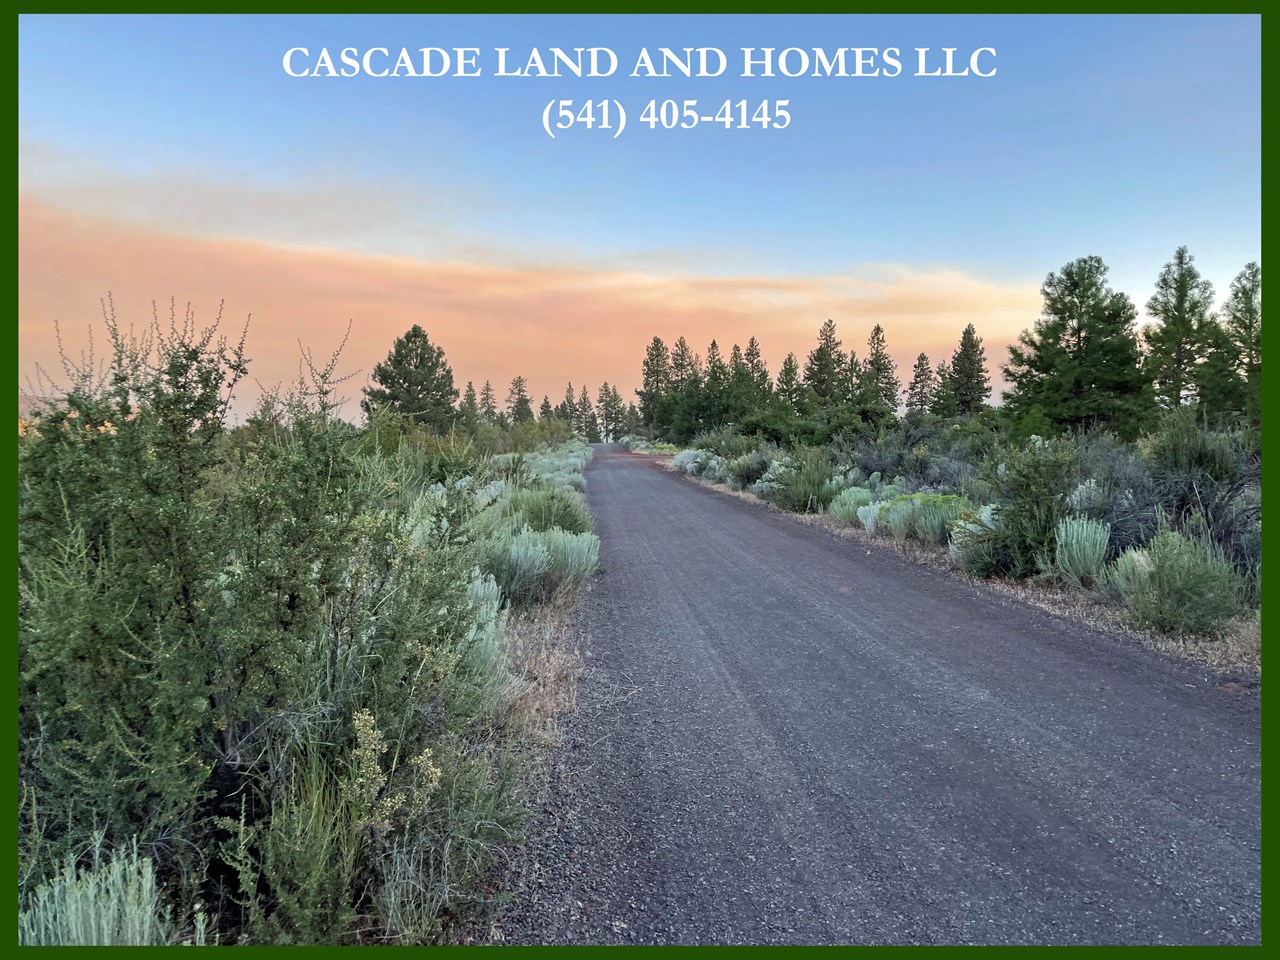 the road maintenance is included in your low yearly hoa fees, and they are very well maintained for easy access to the property. 

this photo was taken when some of the smoke from the wildfire in northern california was drifting in, it makes for a lovely sunset though!